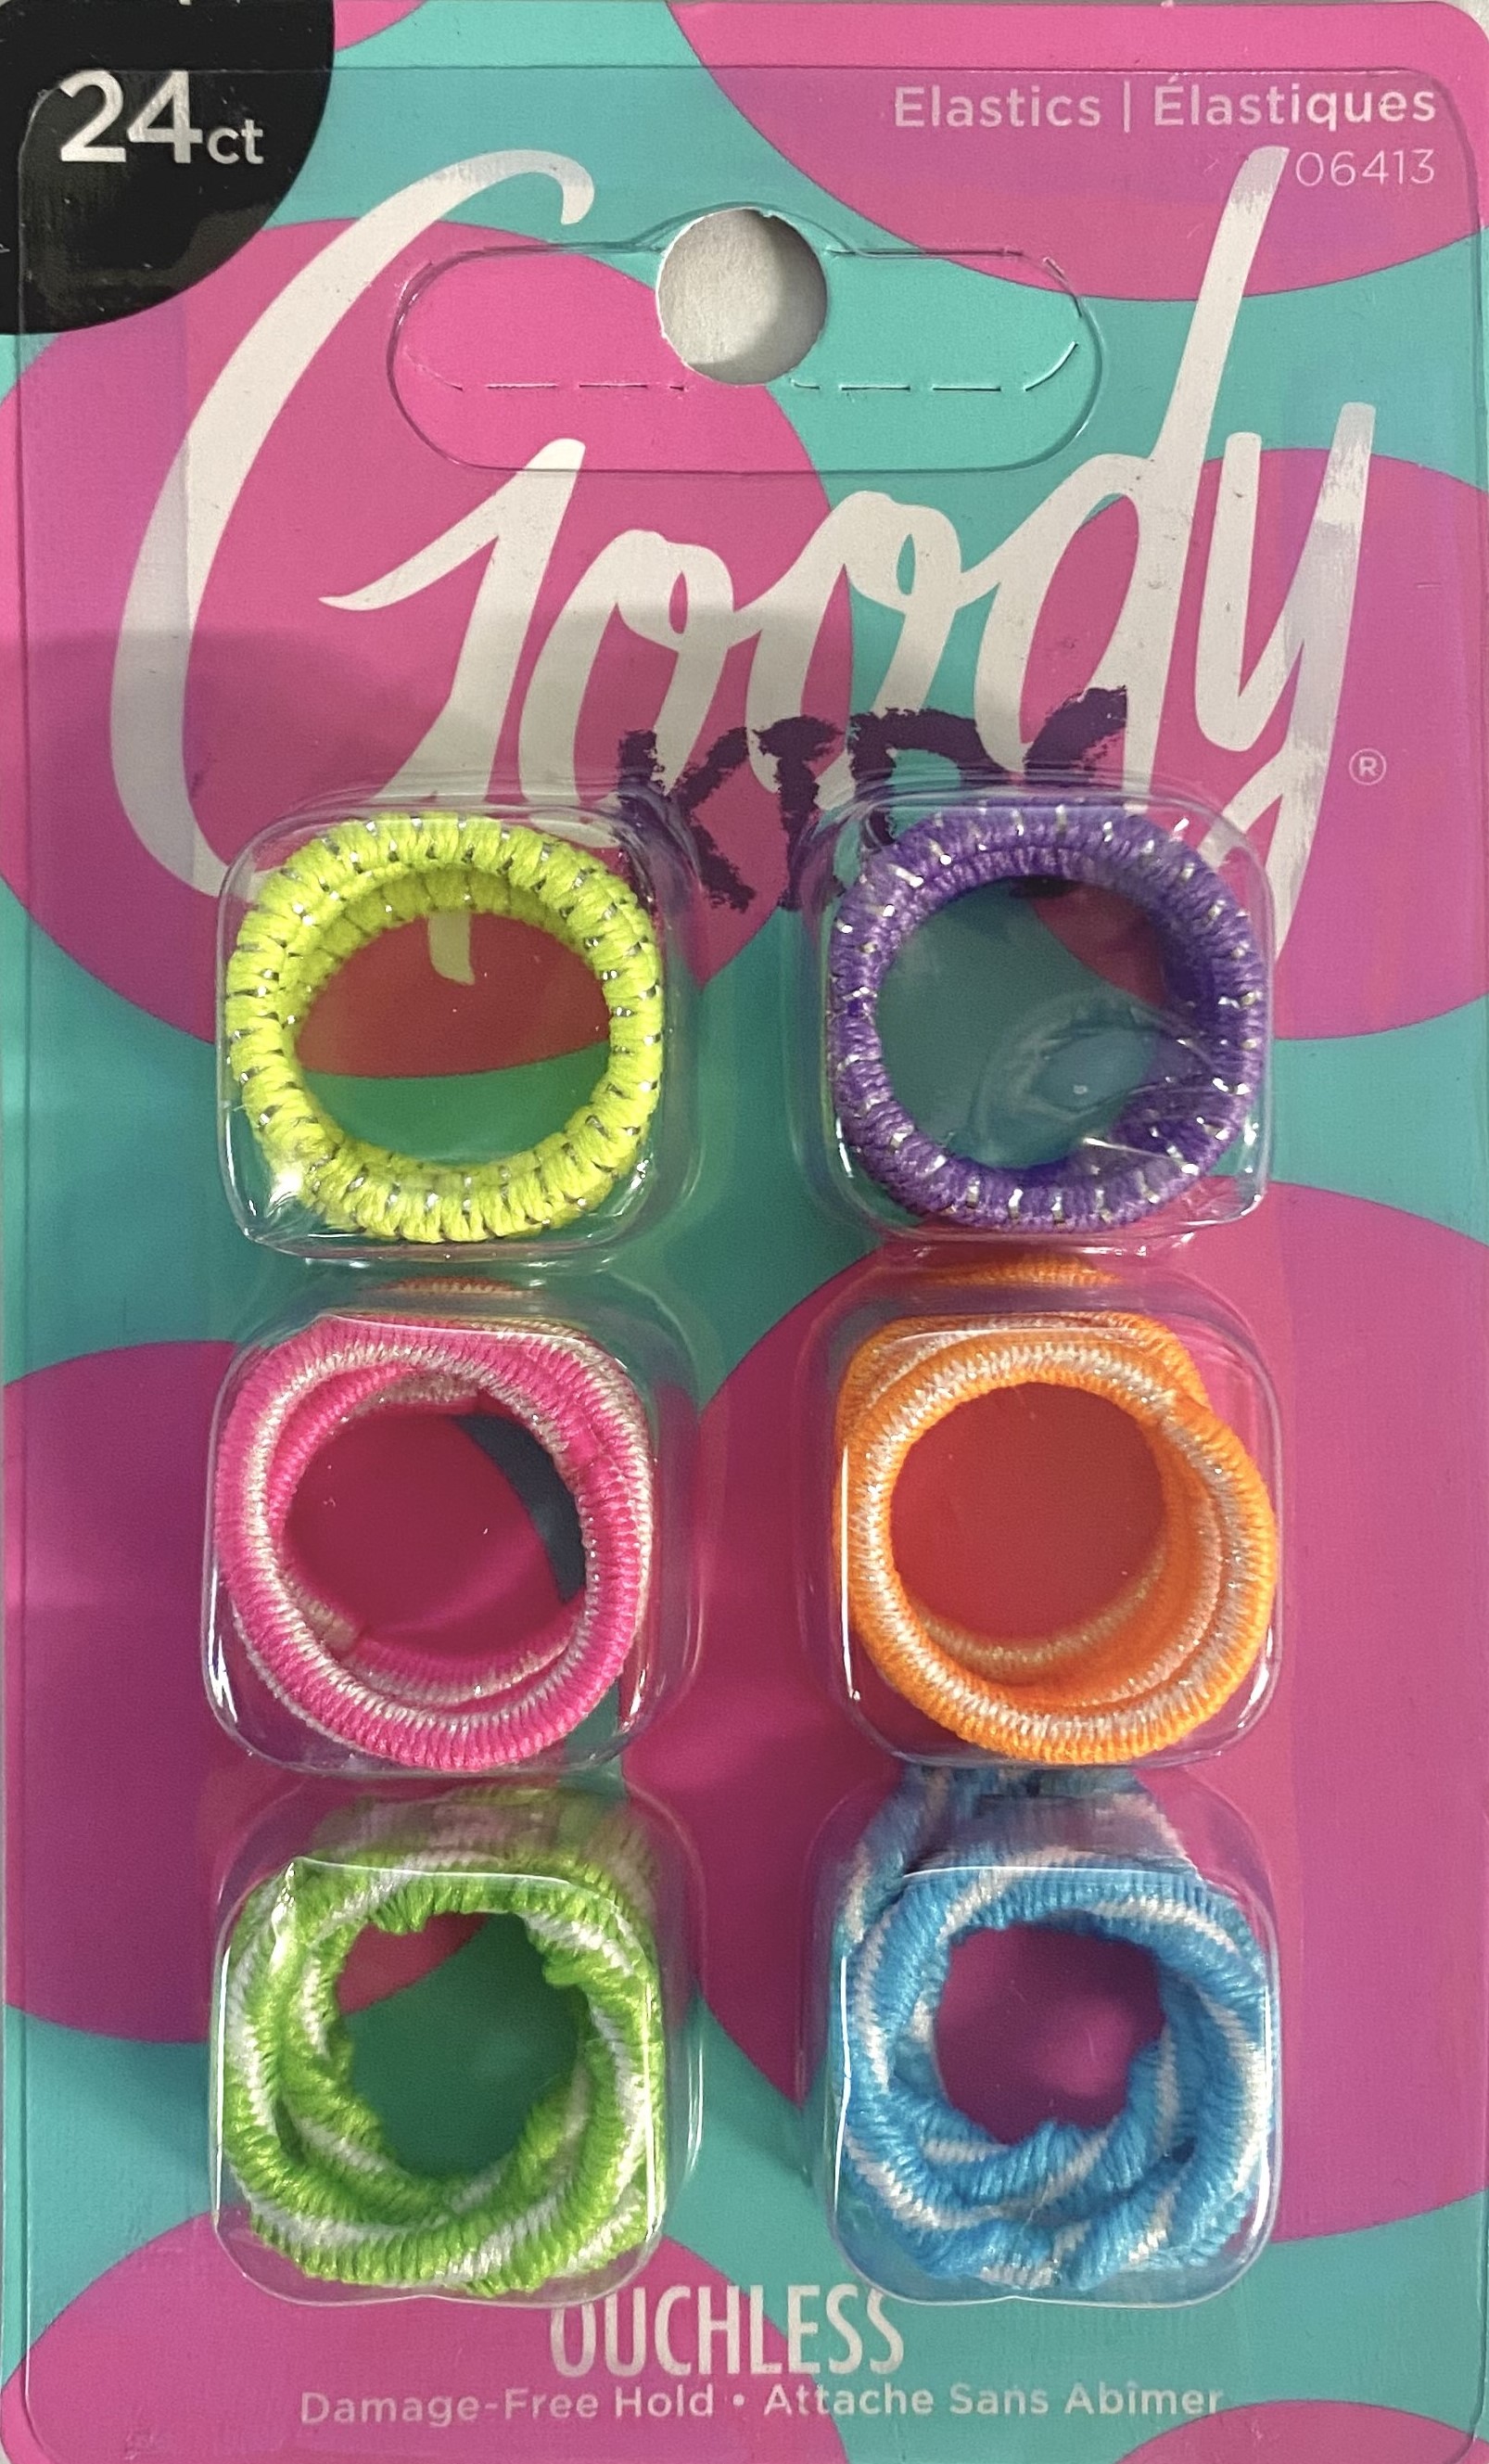 GOODY OUCHLESS KIDS ELASTICS IN TRAY UPC:041457064139 - Click Image to Close